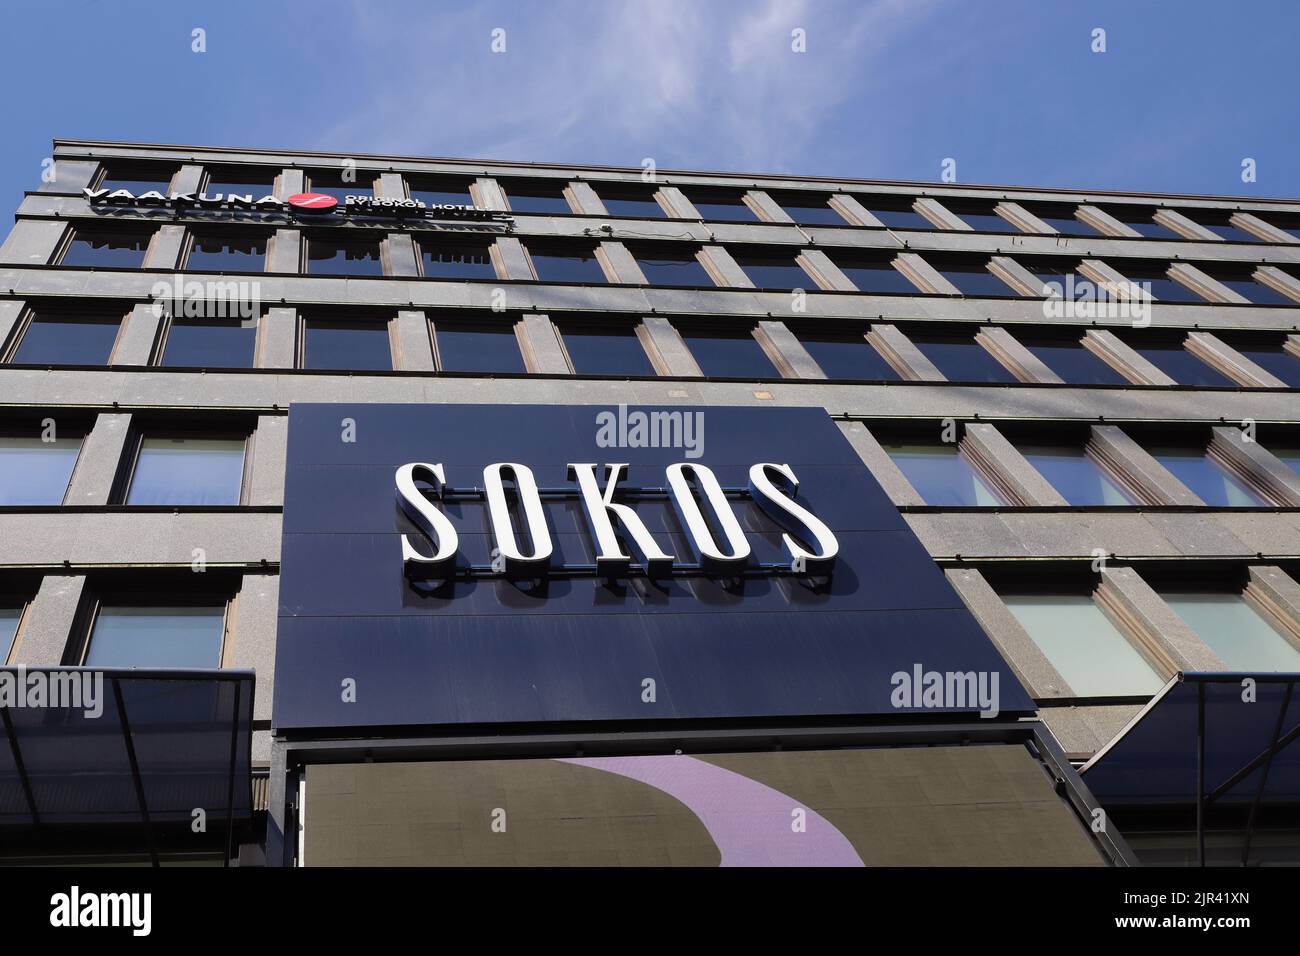 Helsinki, Finland - August 20, 2022: Exterior view of the sign at the Sokos department store located at the Mannerheim strret. Stock Photo